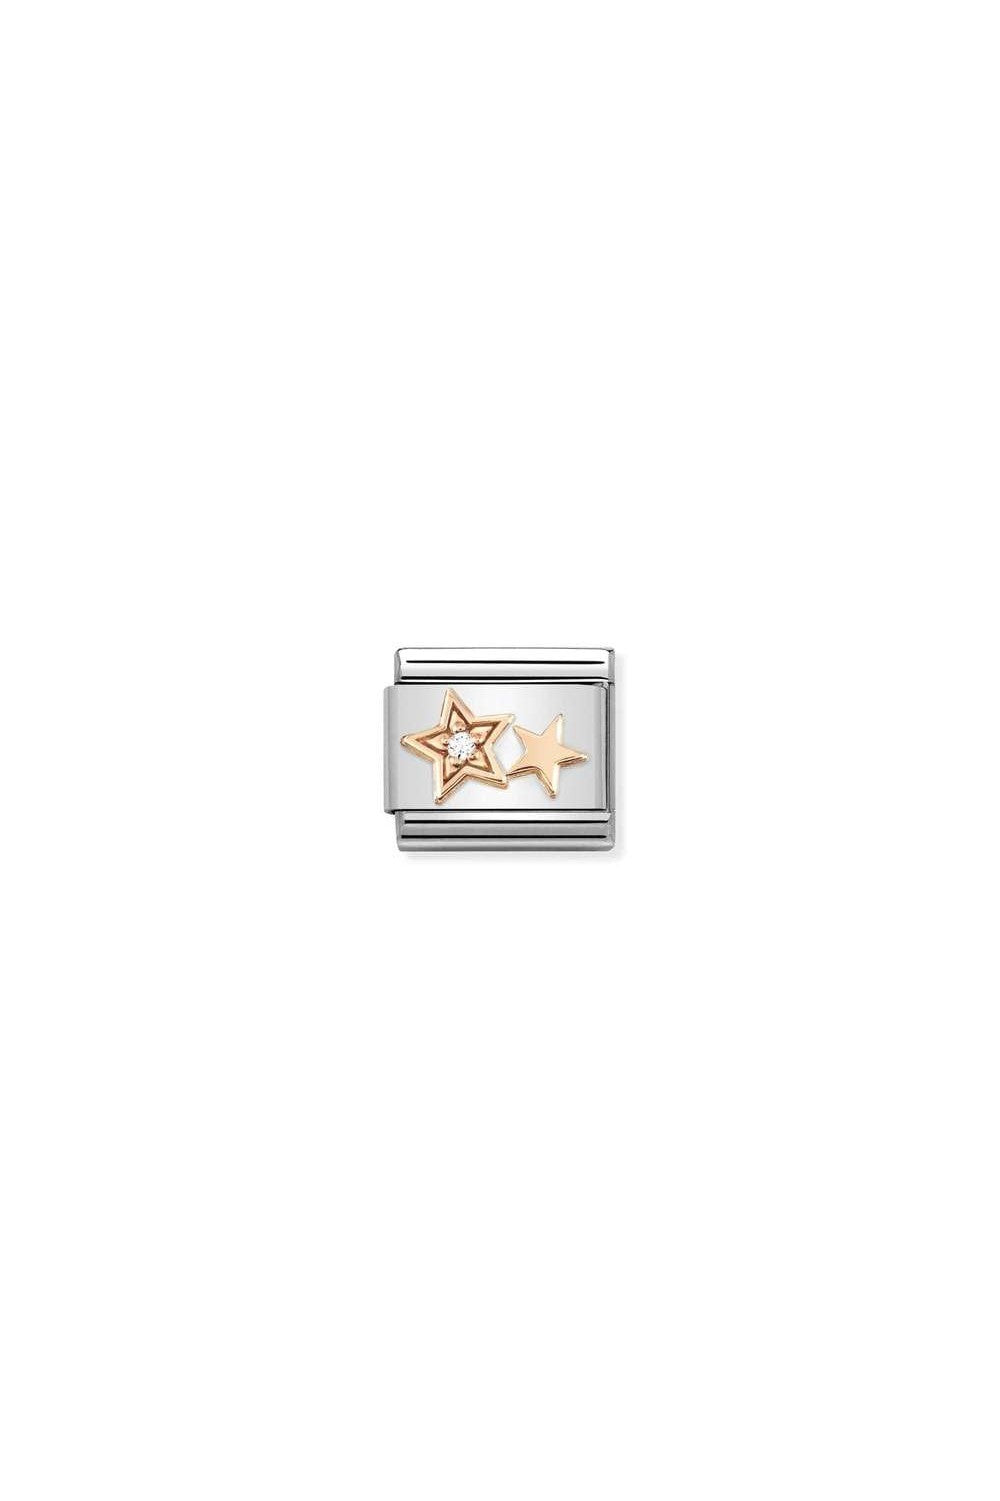 SYMBOLS 9k rose gold and CZ Double Star